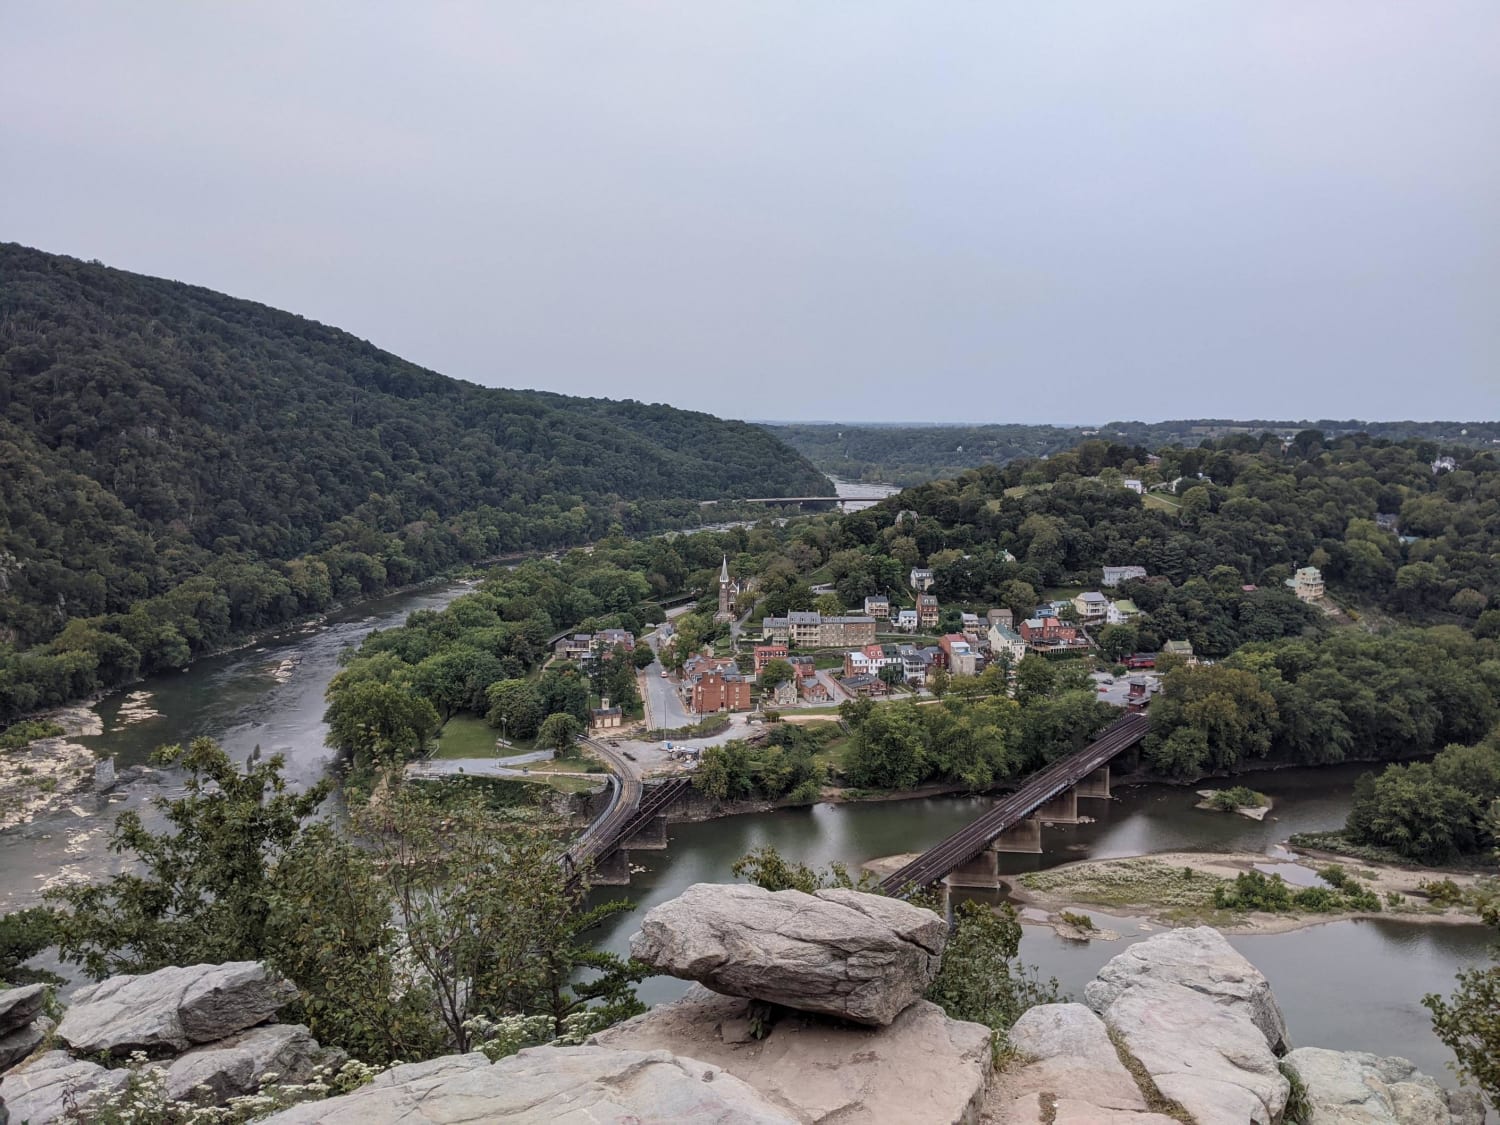 Cousin hiked the Appalachian Trail and raved about Harpers Ferry, WV. Took a trail recommendation from a local and it did not disappoint!